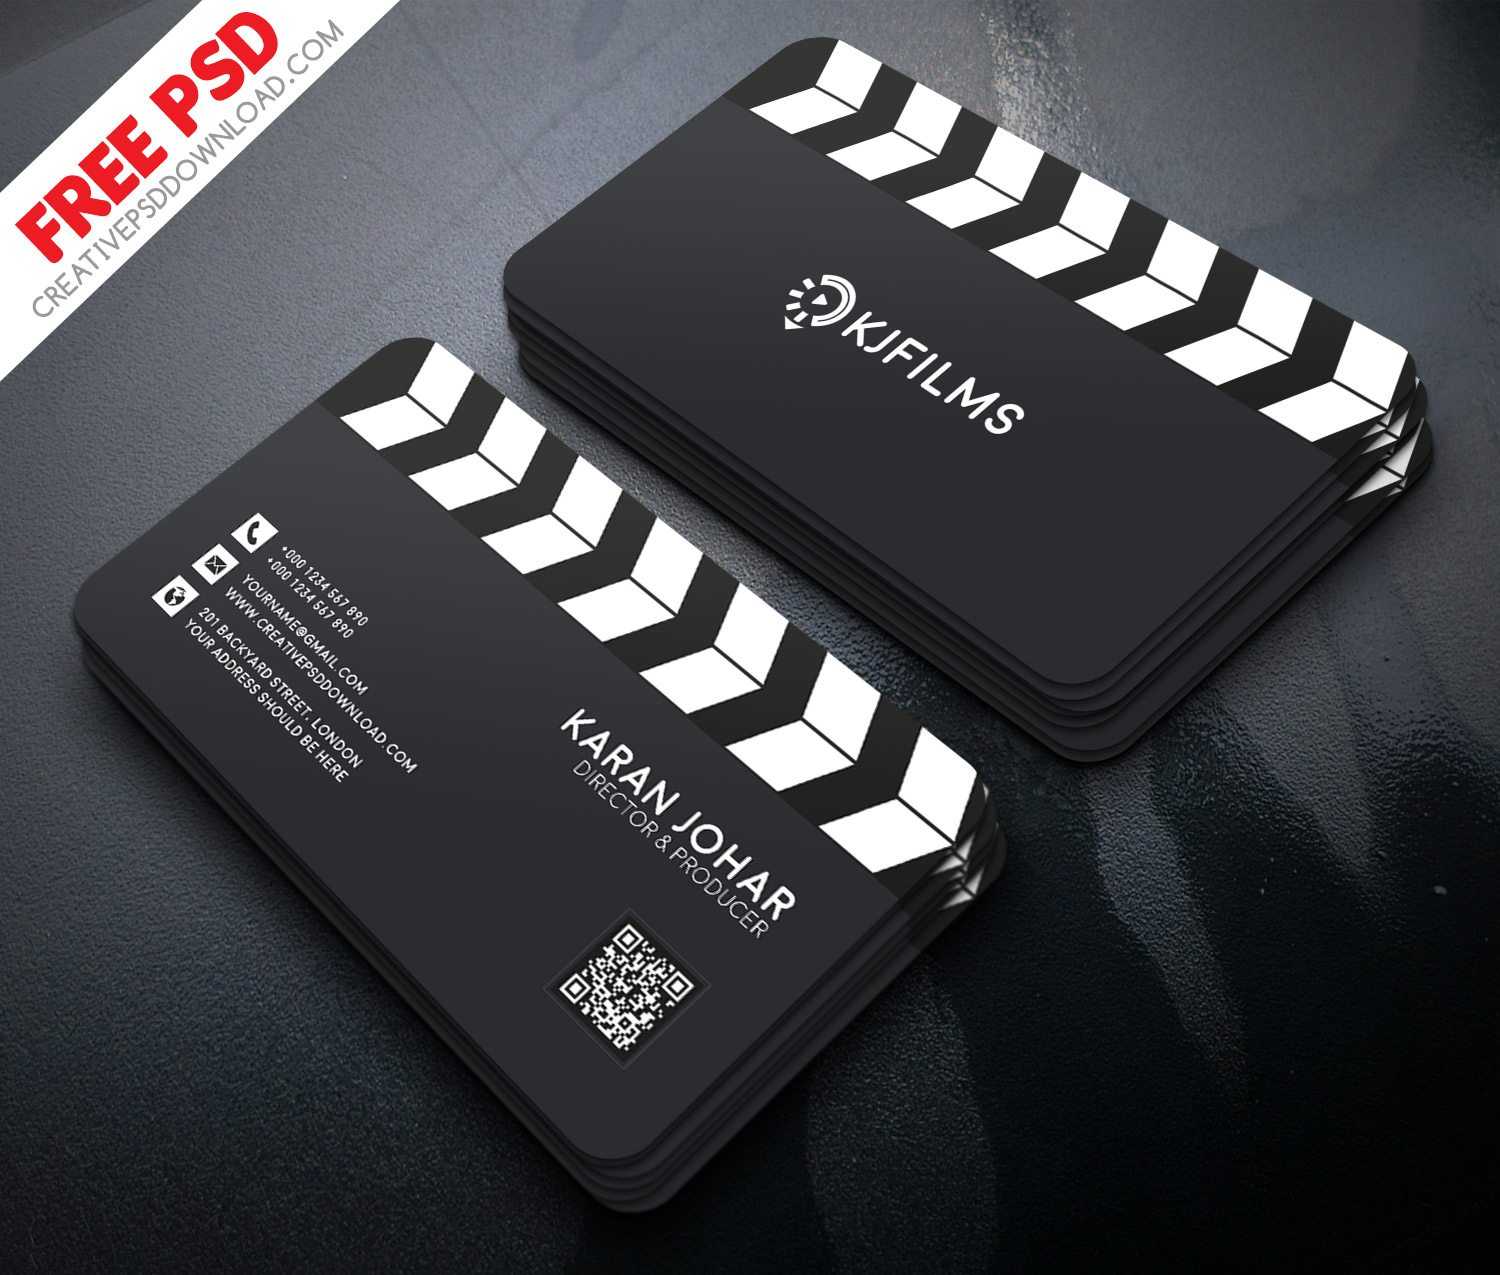 Film Clipper Free Business Card Psd Intended For Visiting Card Psd Template Free Download